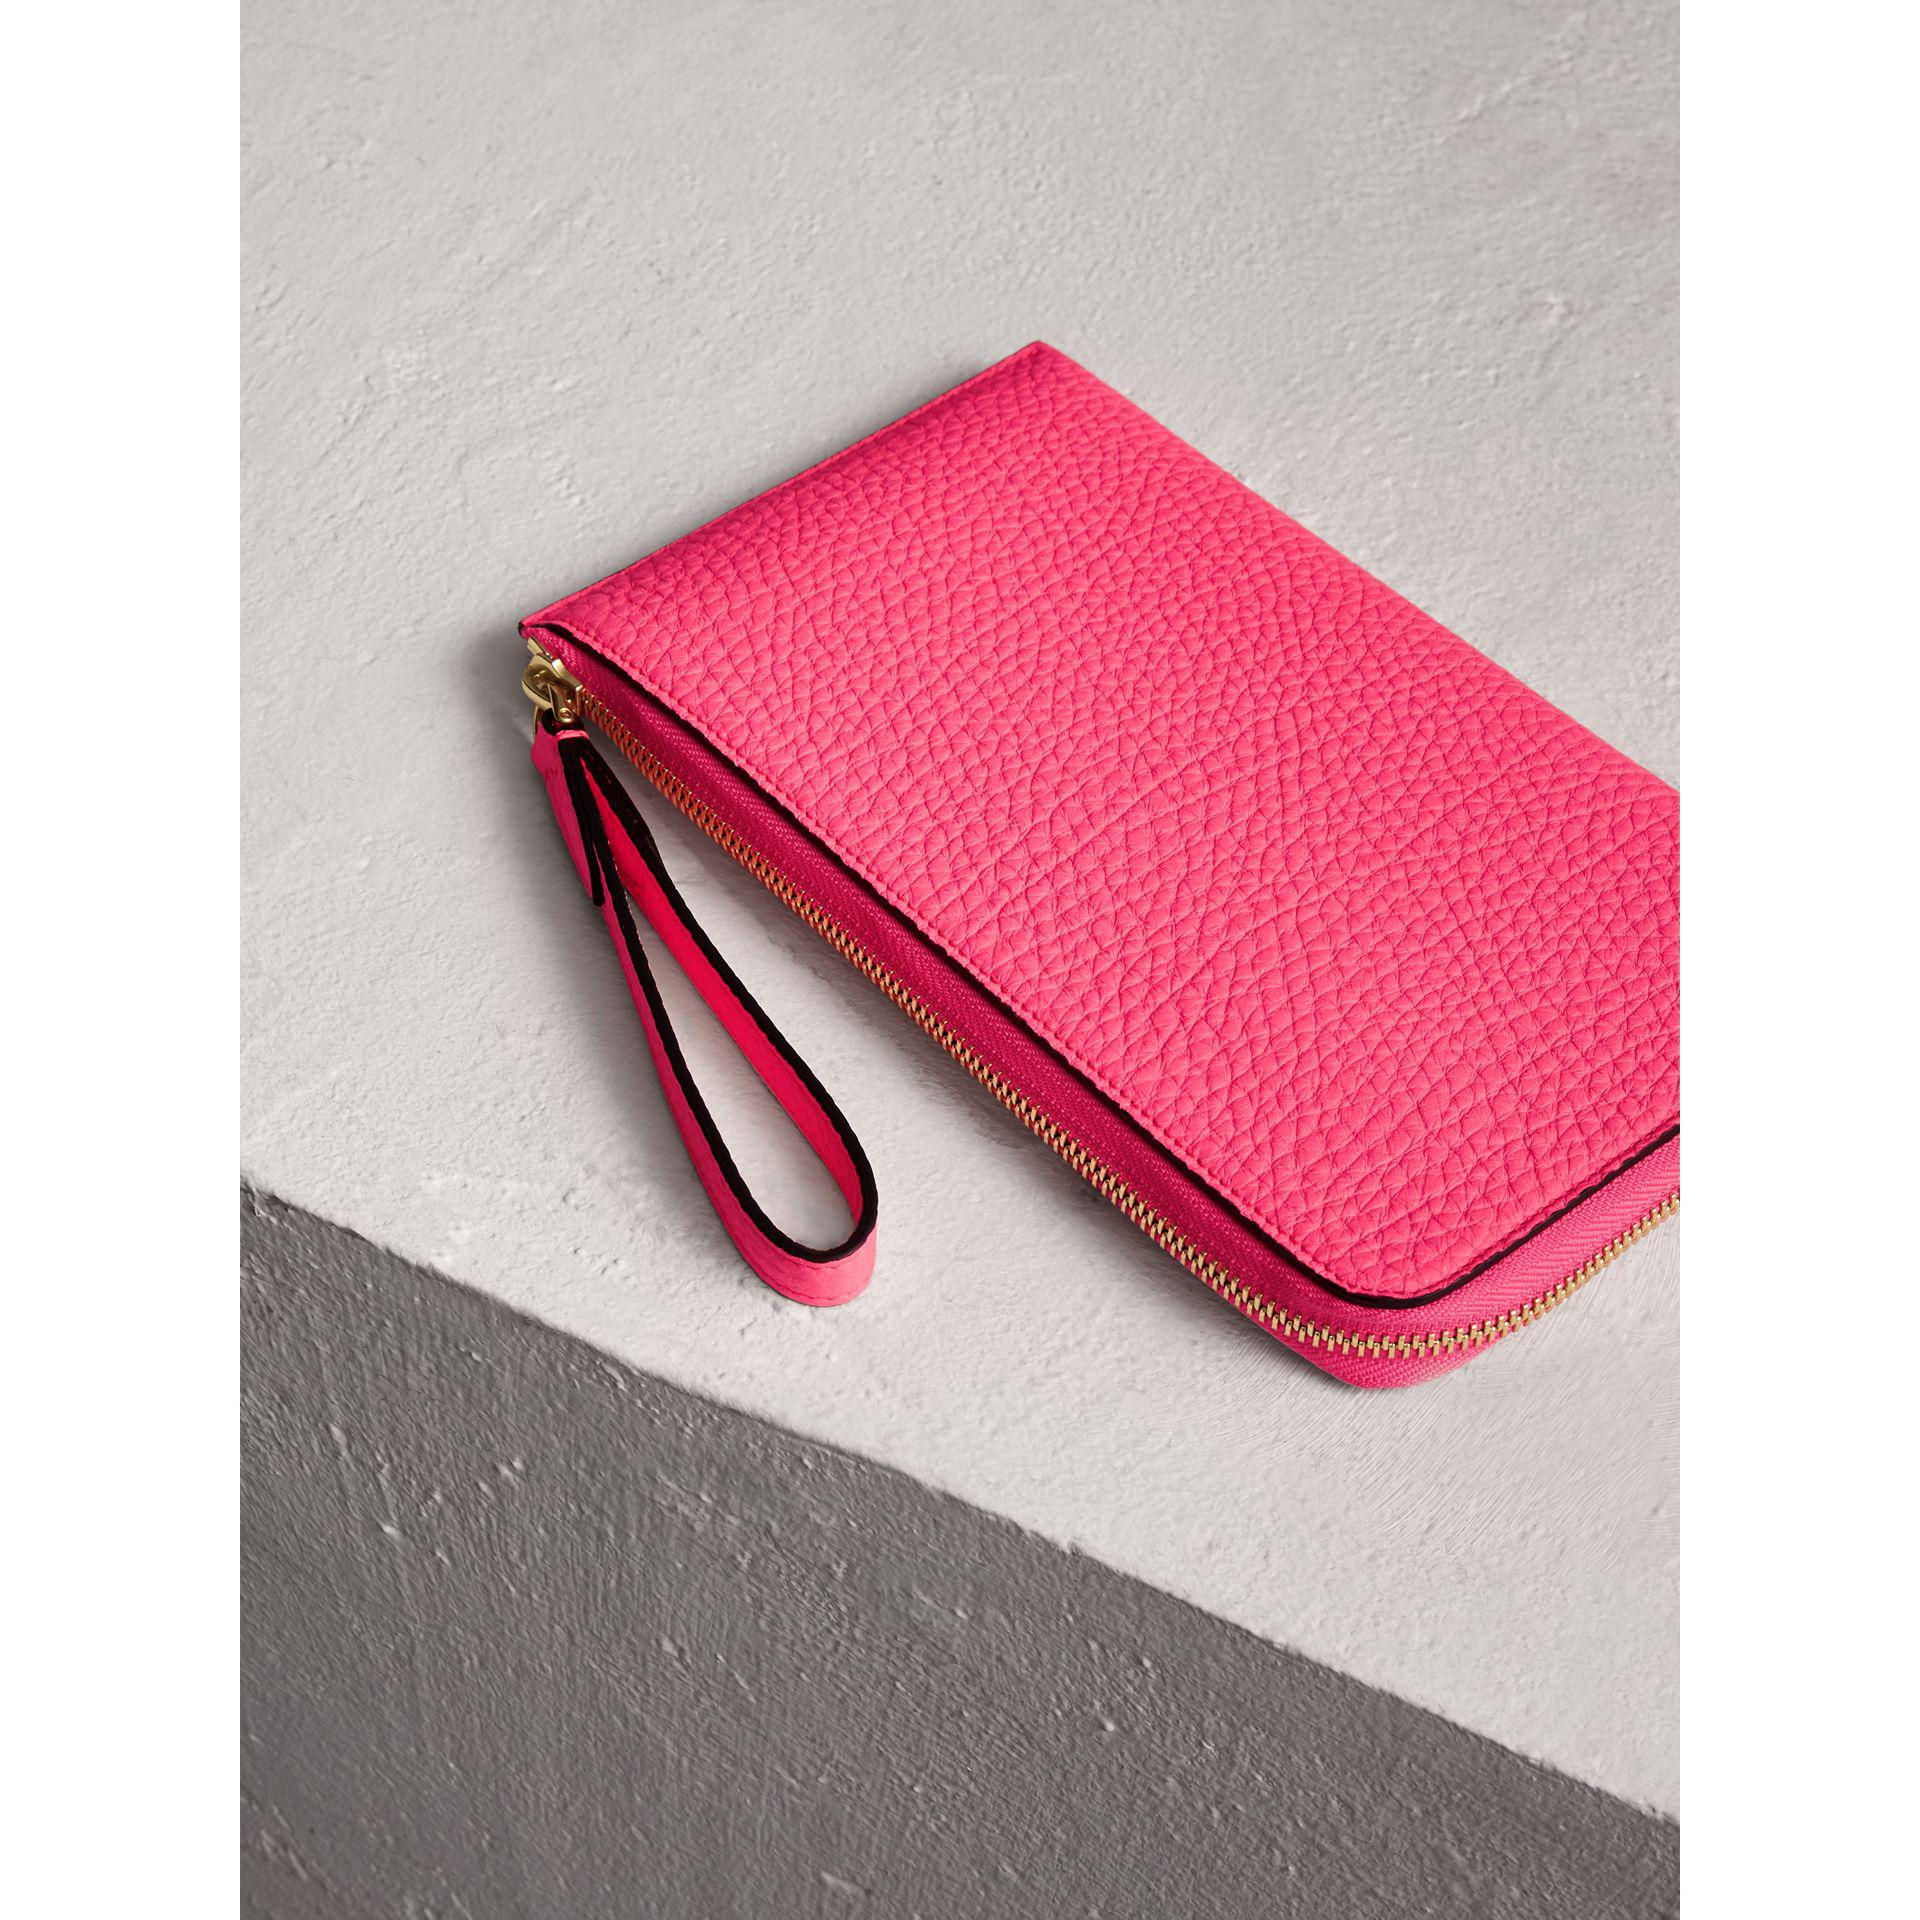 Burberry Embossed Neon Leather Travel Wallet in Pink